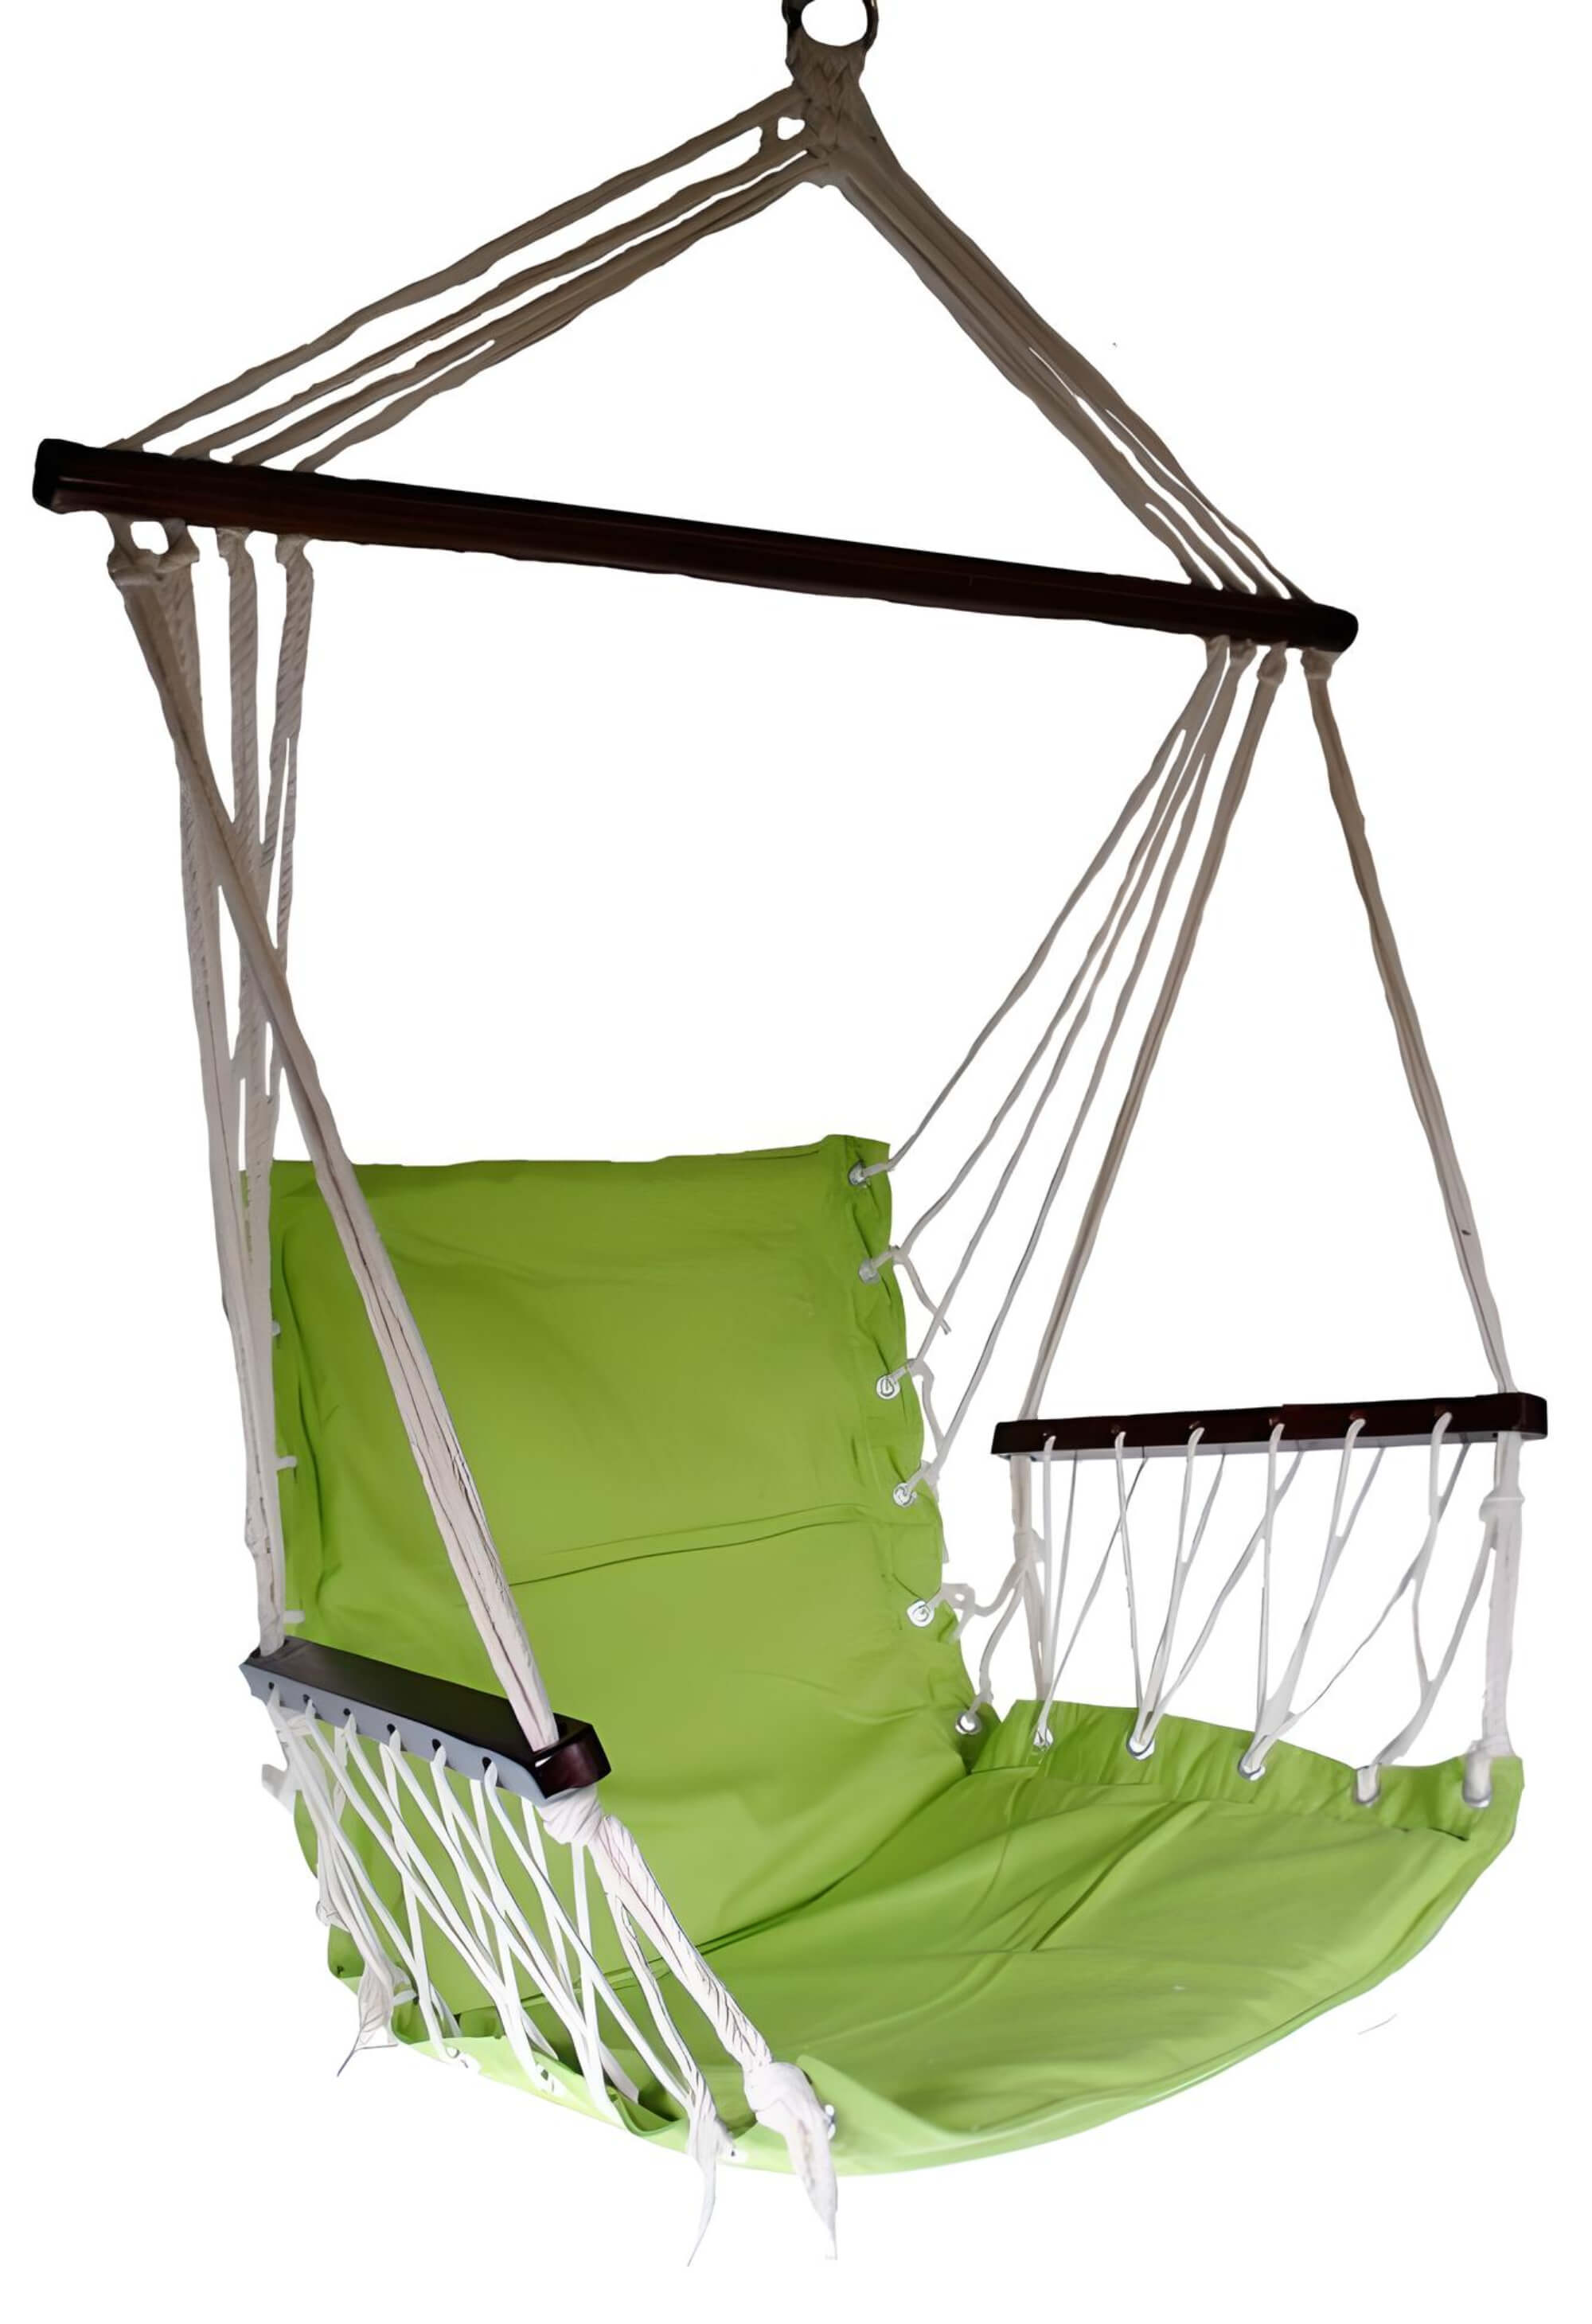    hanging-hammock-chair-with-wooden-armrests-green-colour